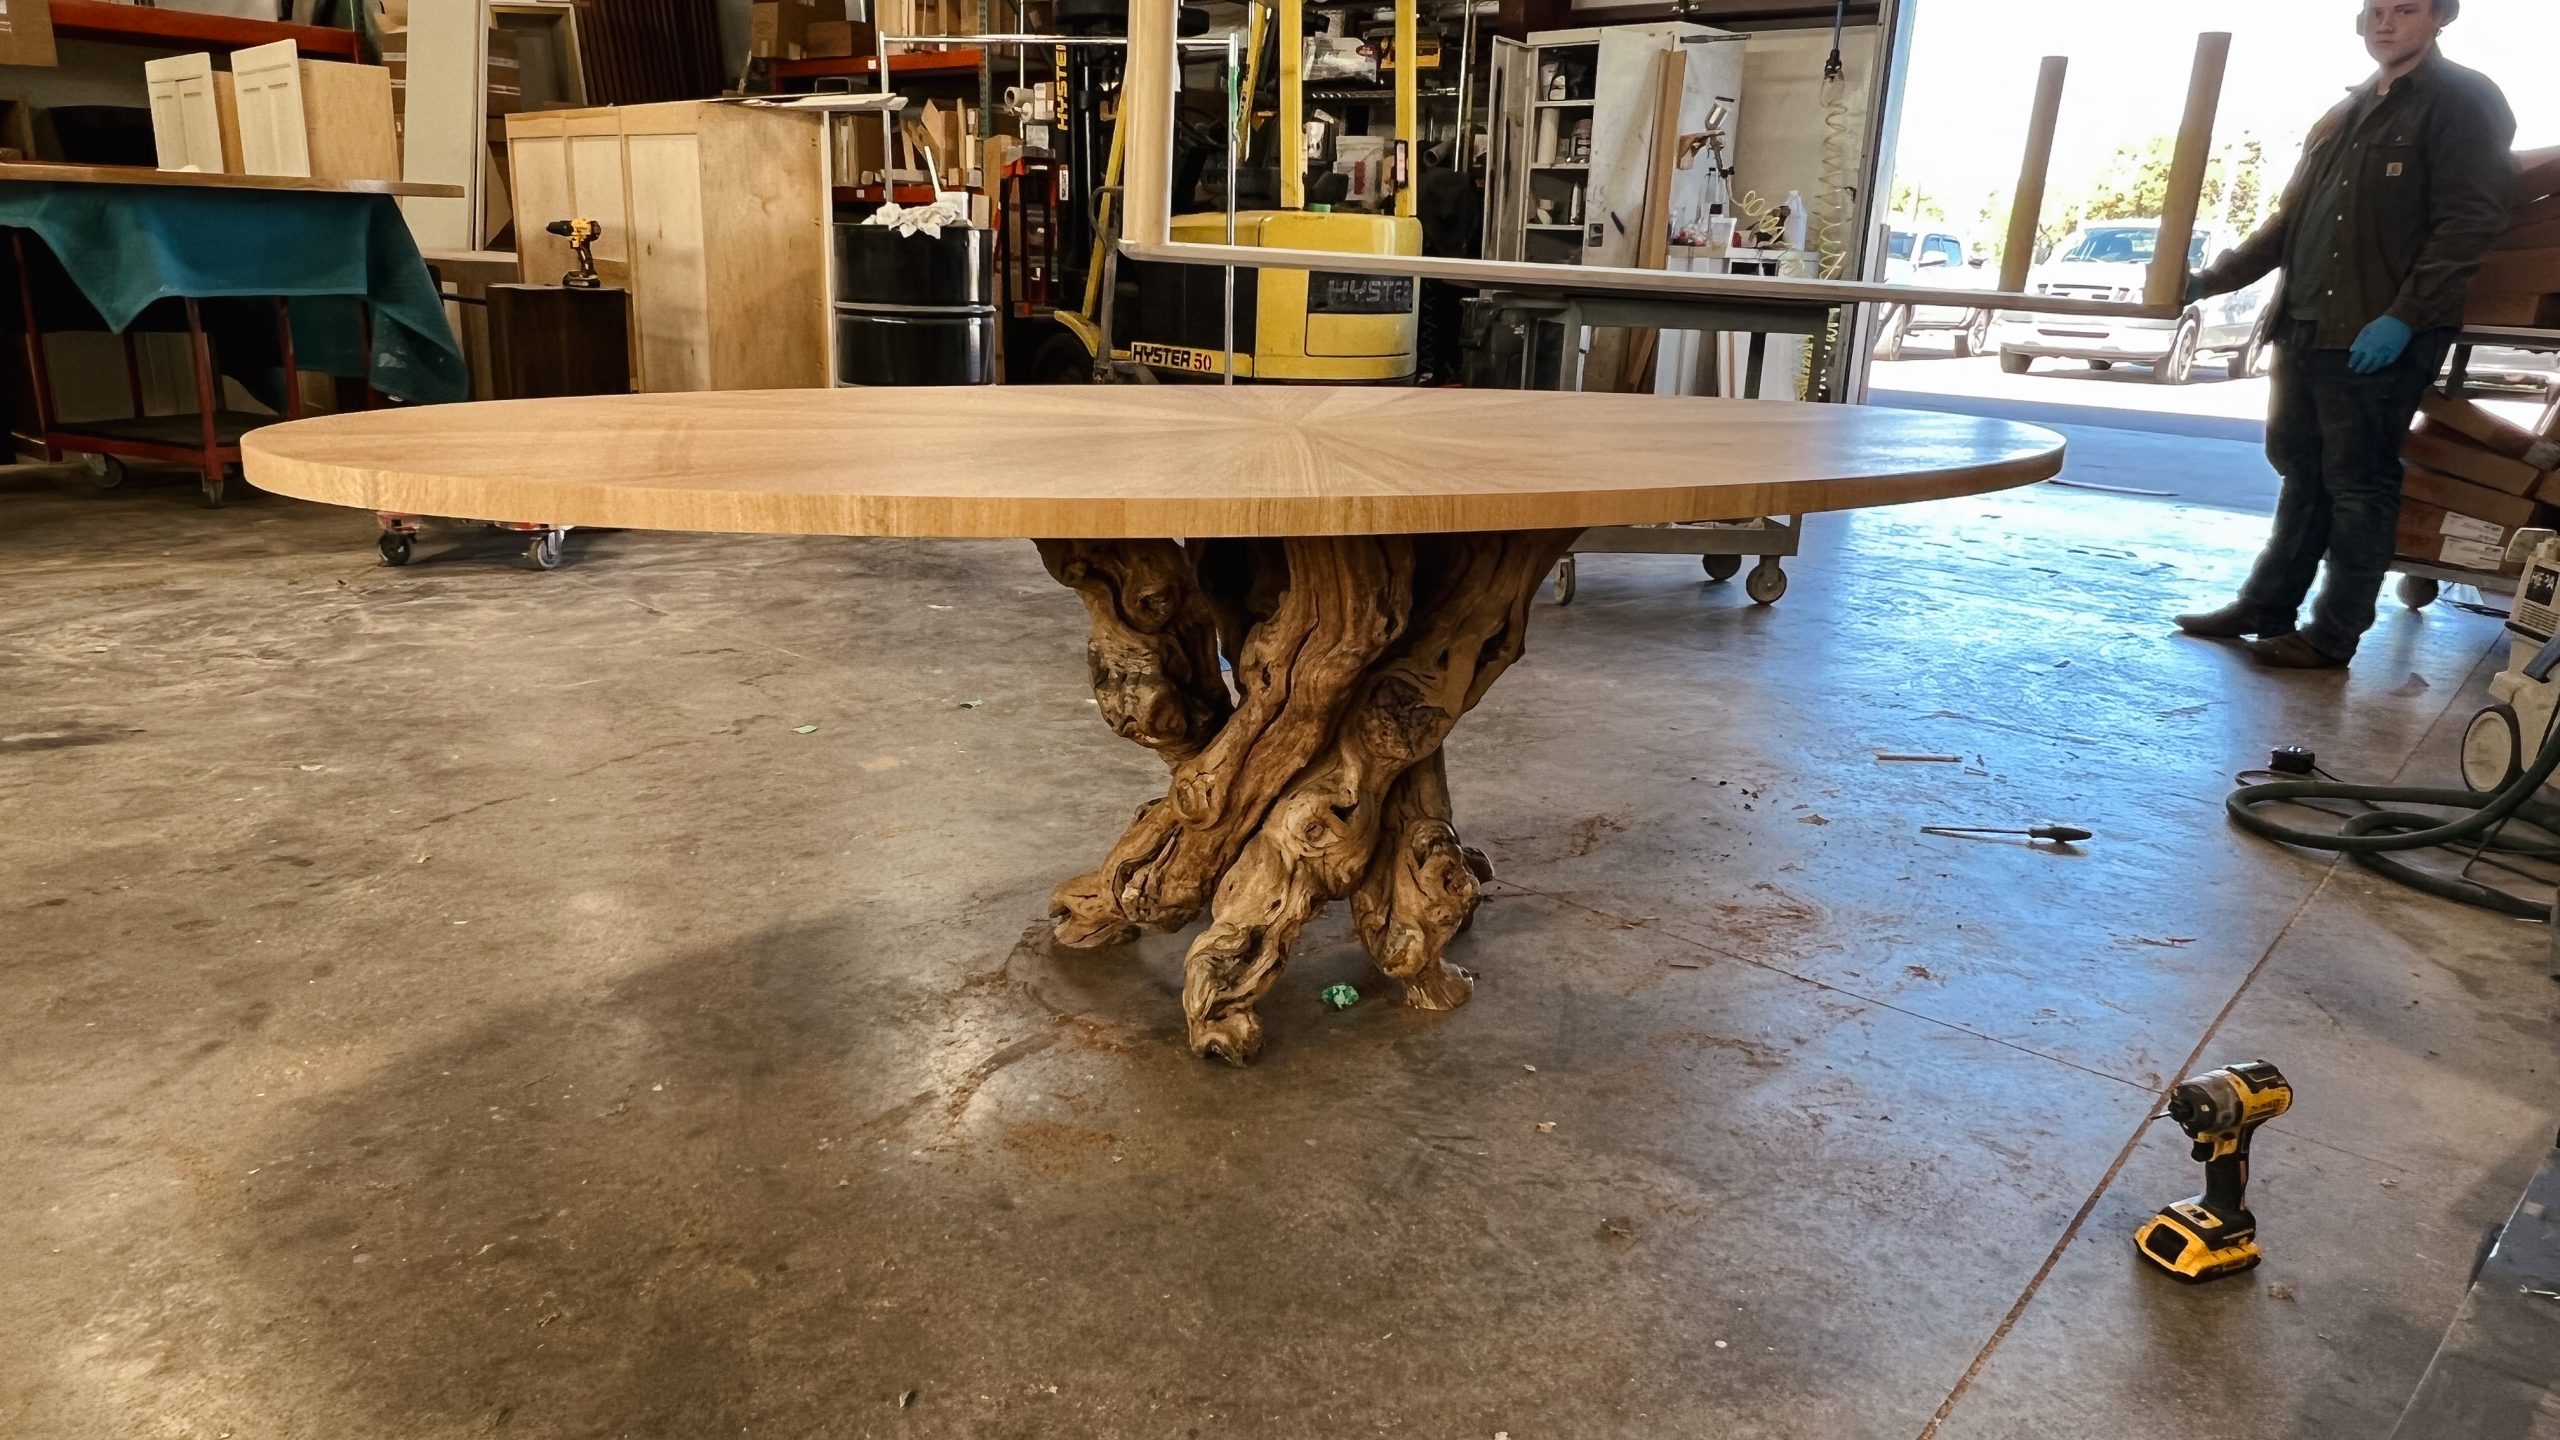 This radiate table the customer provided a tree root for the base for her own personal touch.